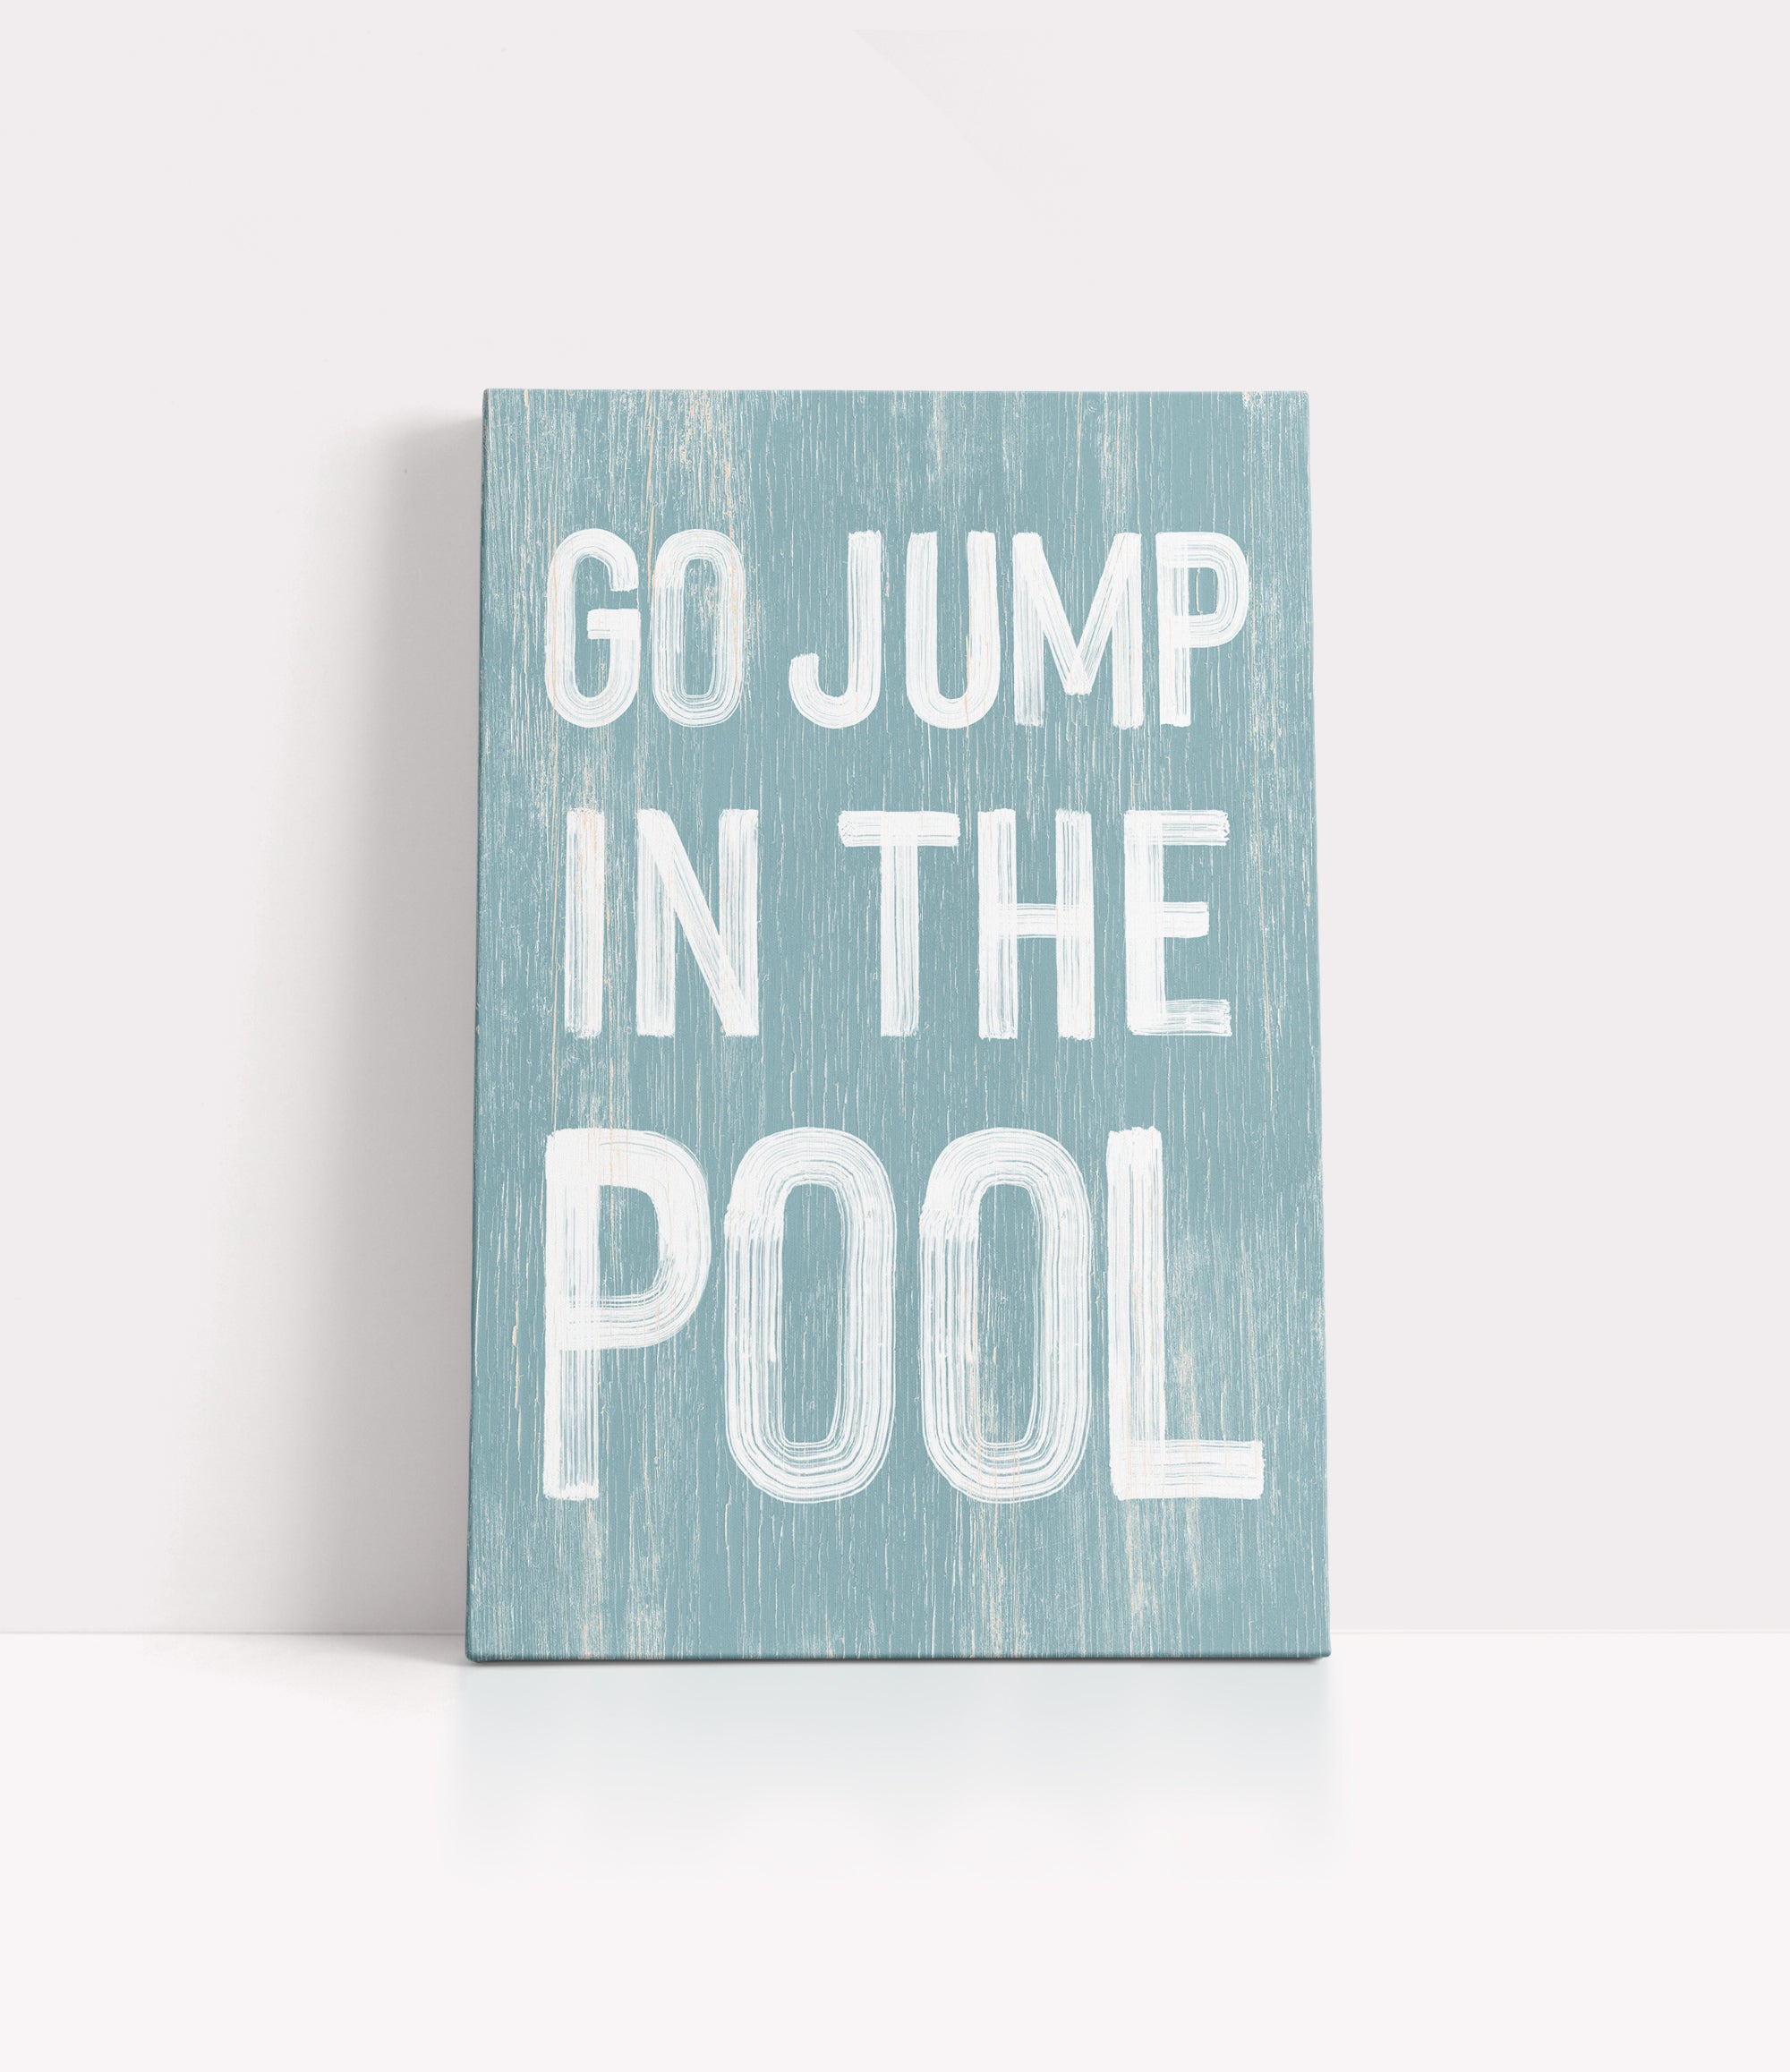 a sign that says go jump in the pool